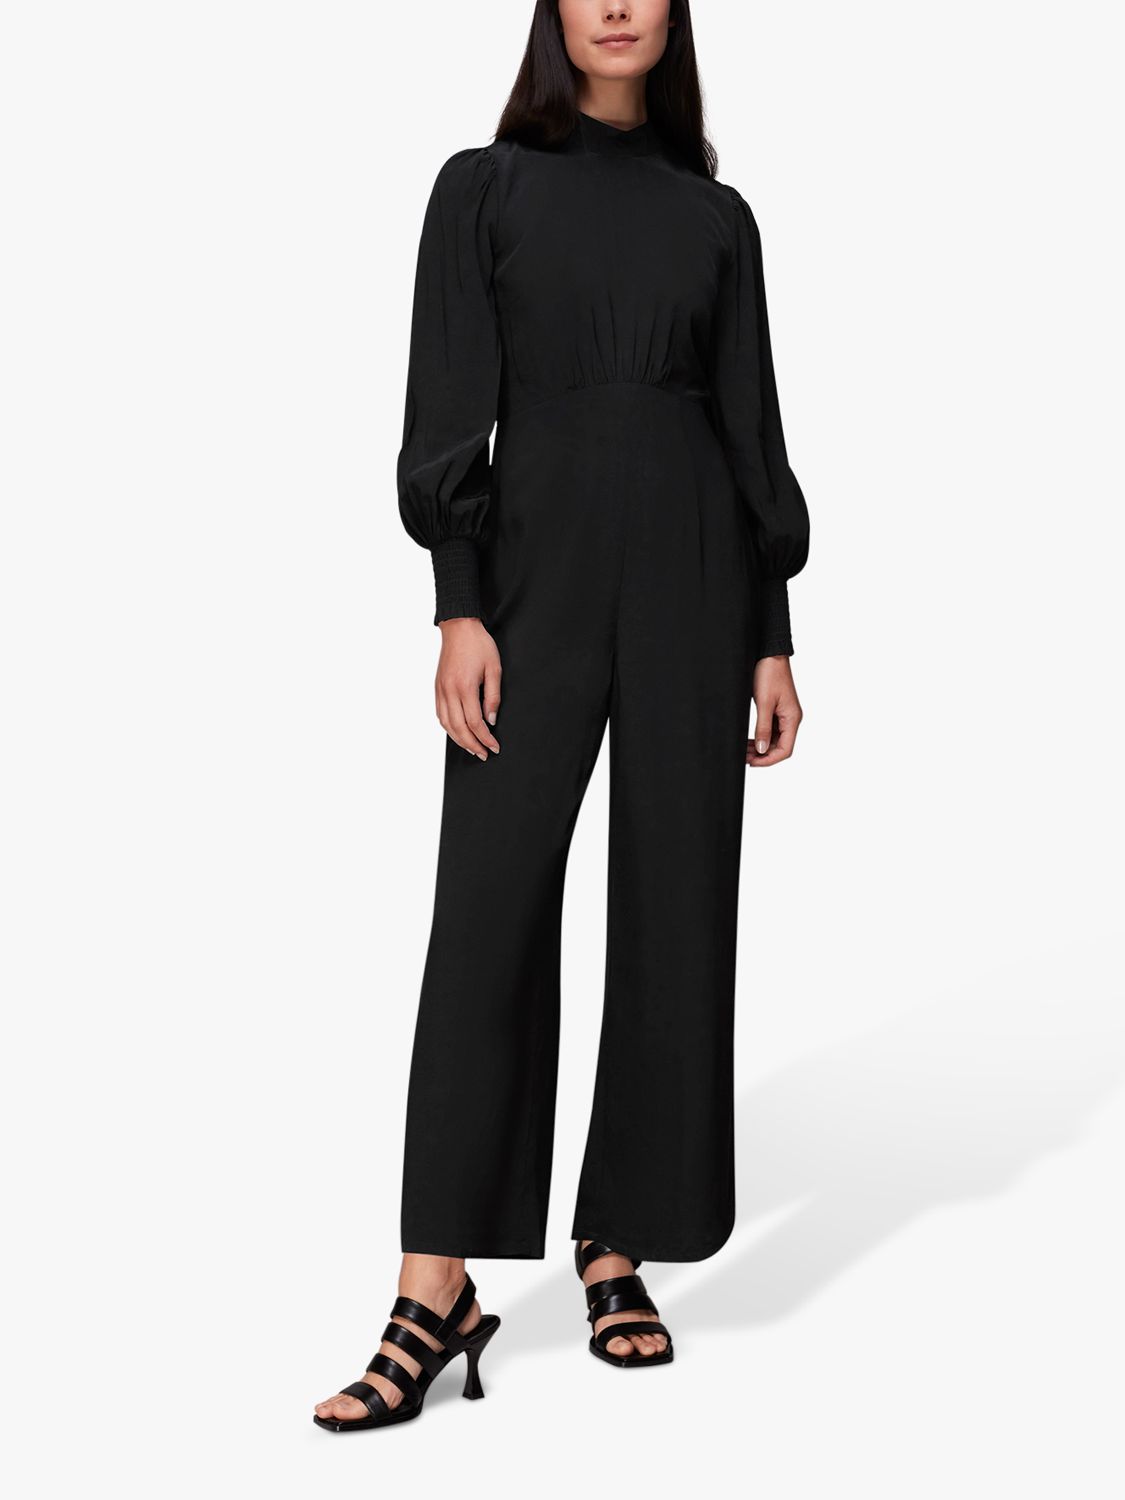 Whistles Shirred Cuff Empire Line Jumpsuit, Black at John Lewis & Partners